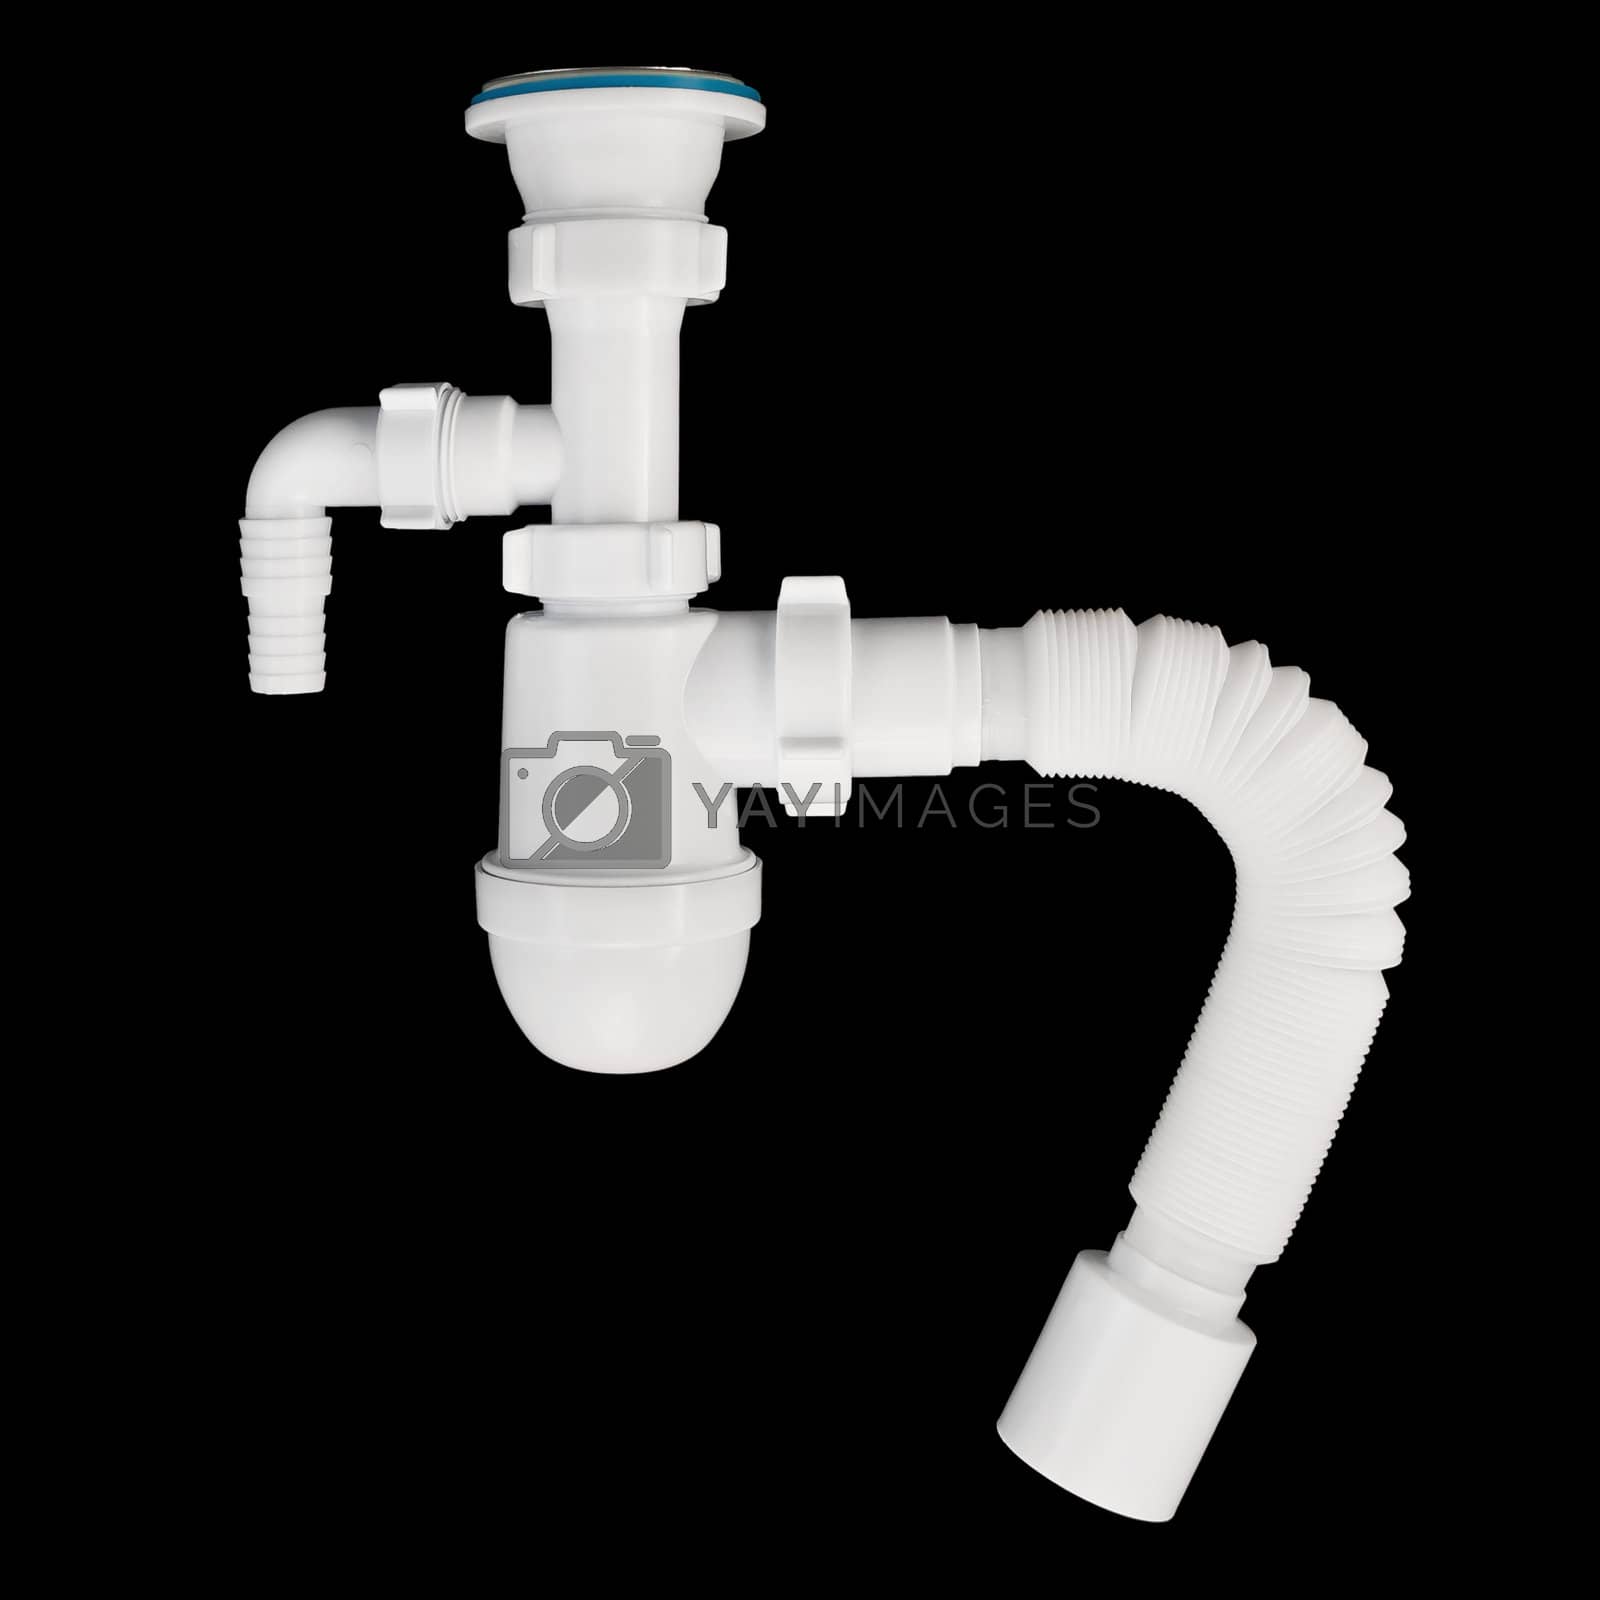 Royalty free image of Drain fittings for sinks by rezkrr